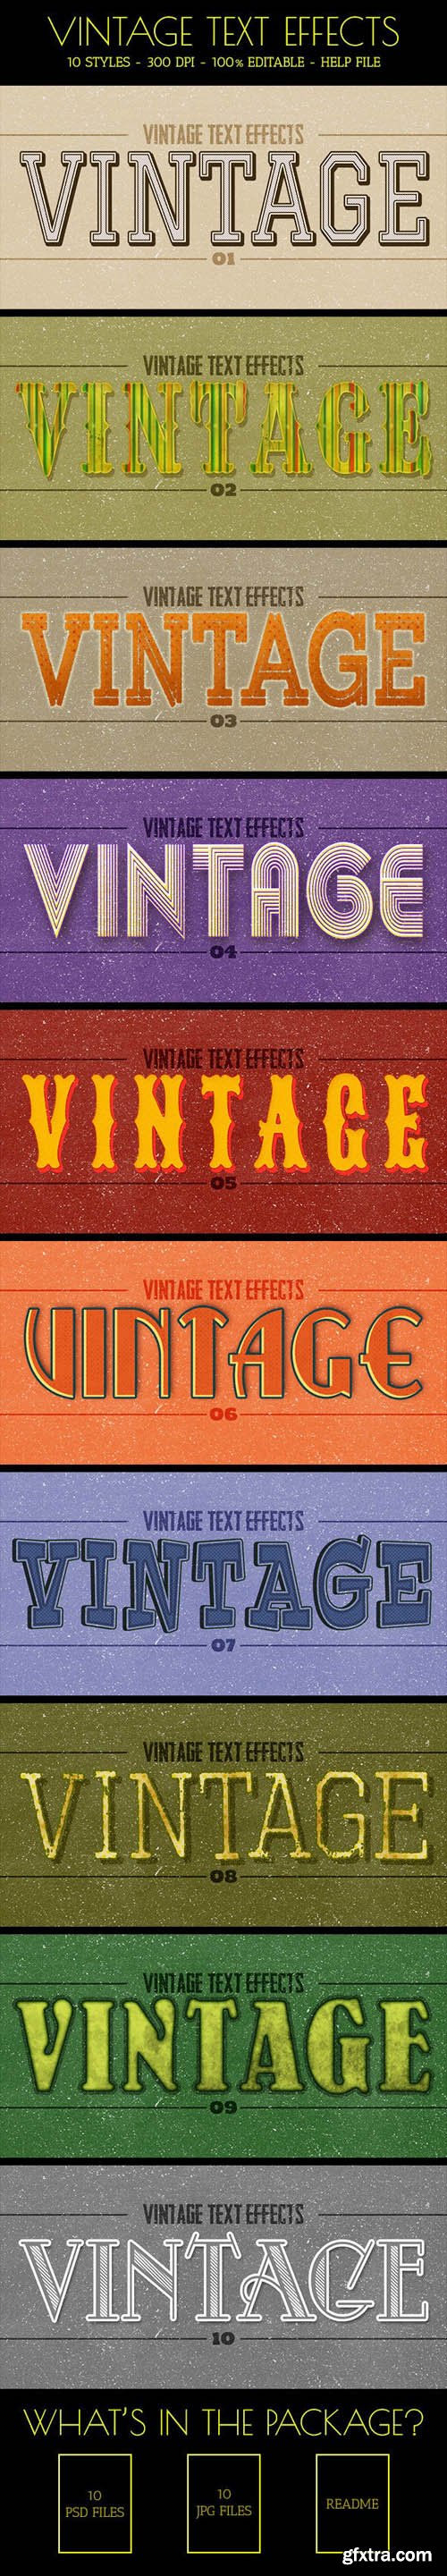 GraphicRiver - Vintage Text Effects - 10 Styles 10848058